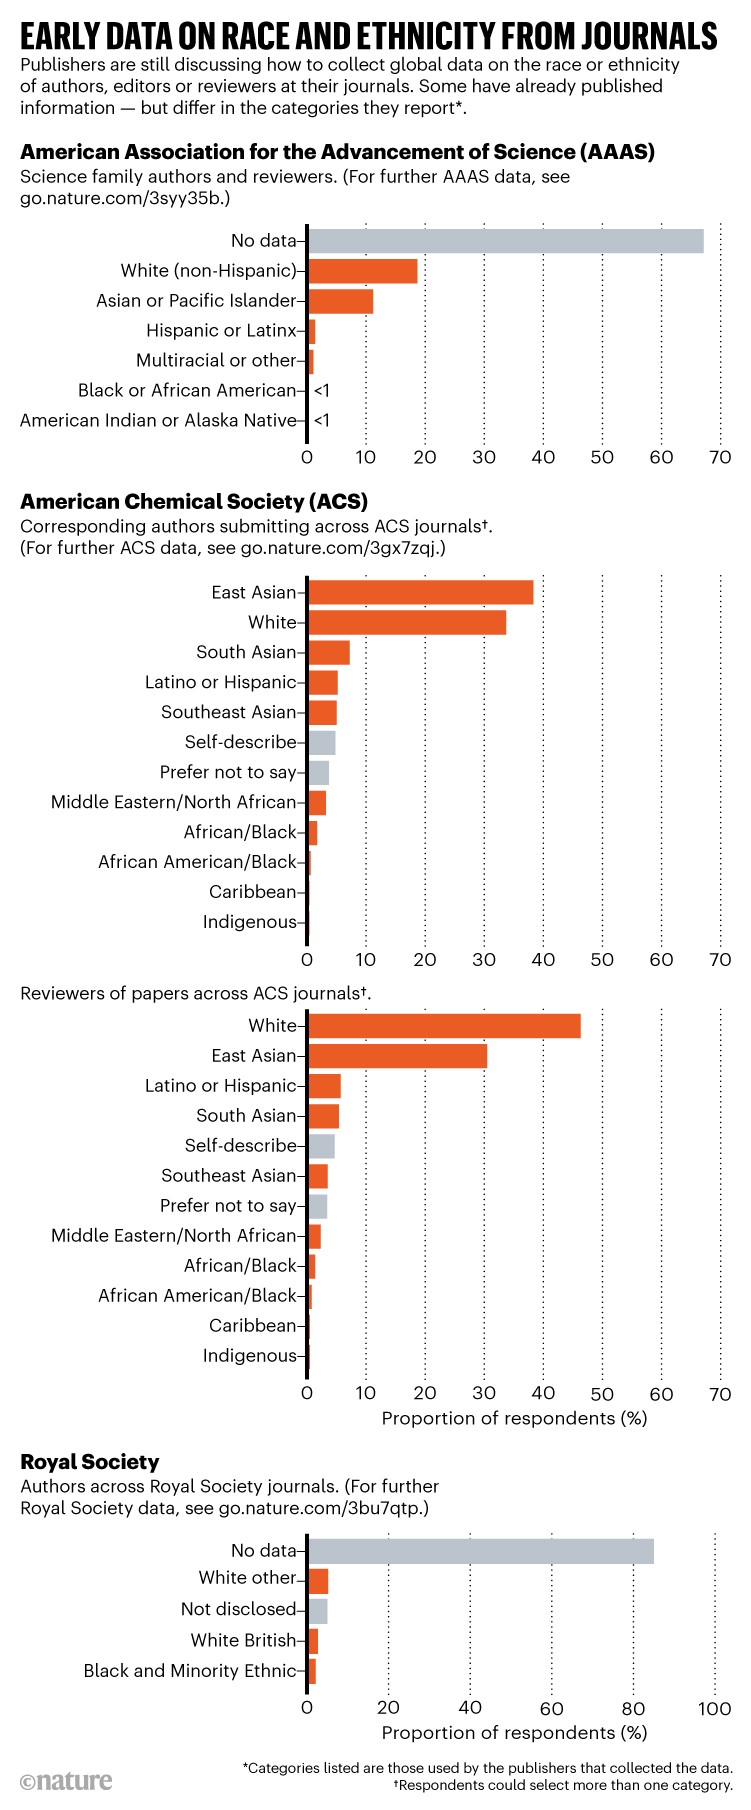 Early data on race and ethnicity from journals: Available data for authors, editors or reviewers from various publishers.